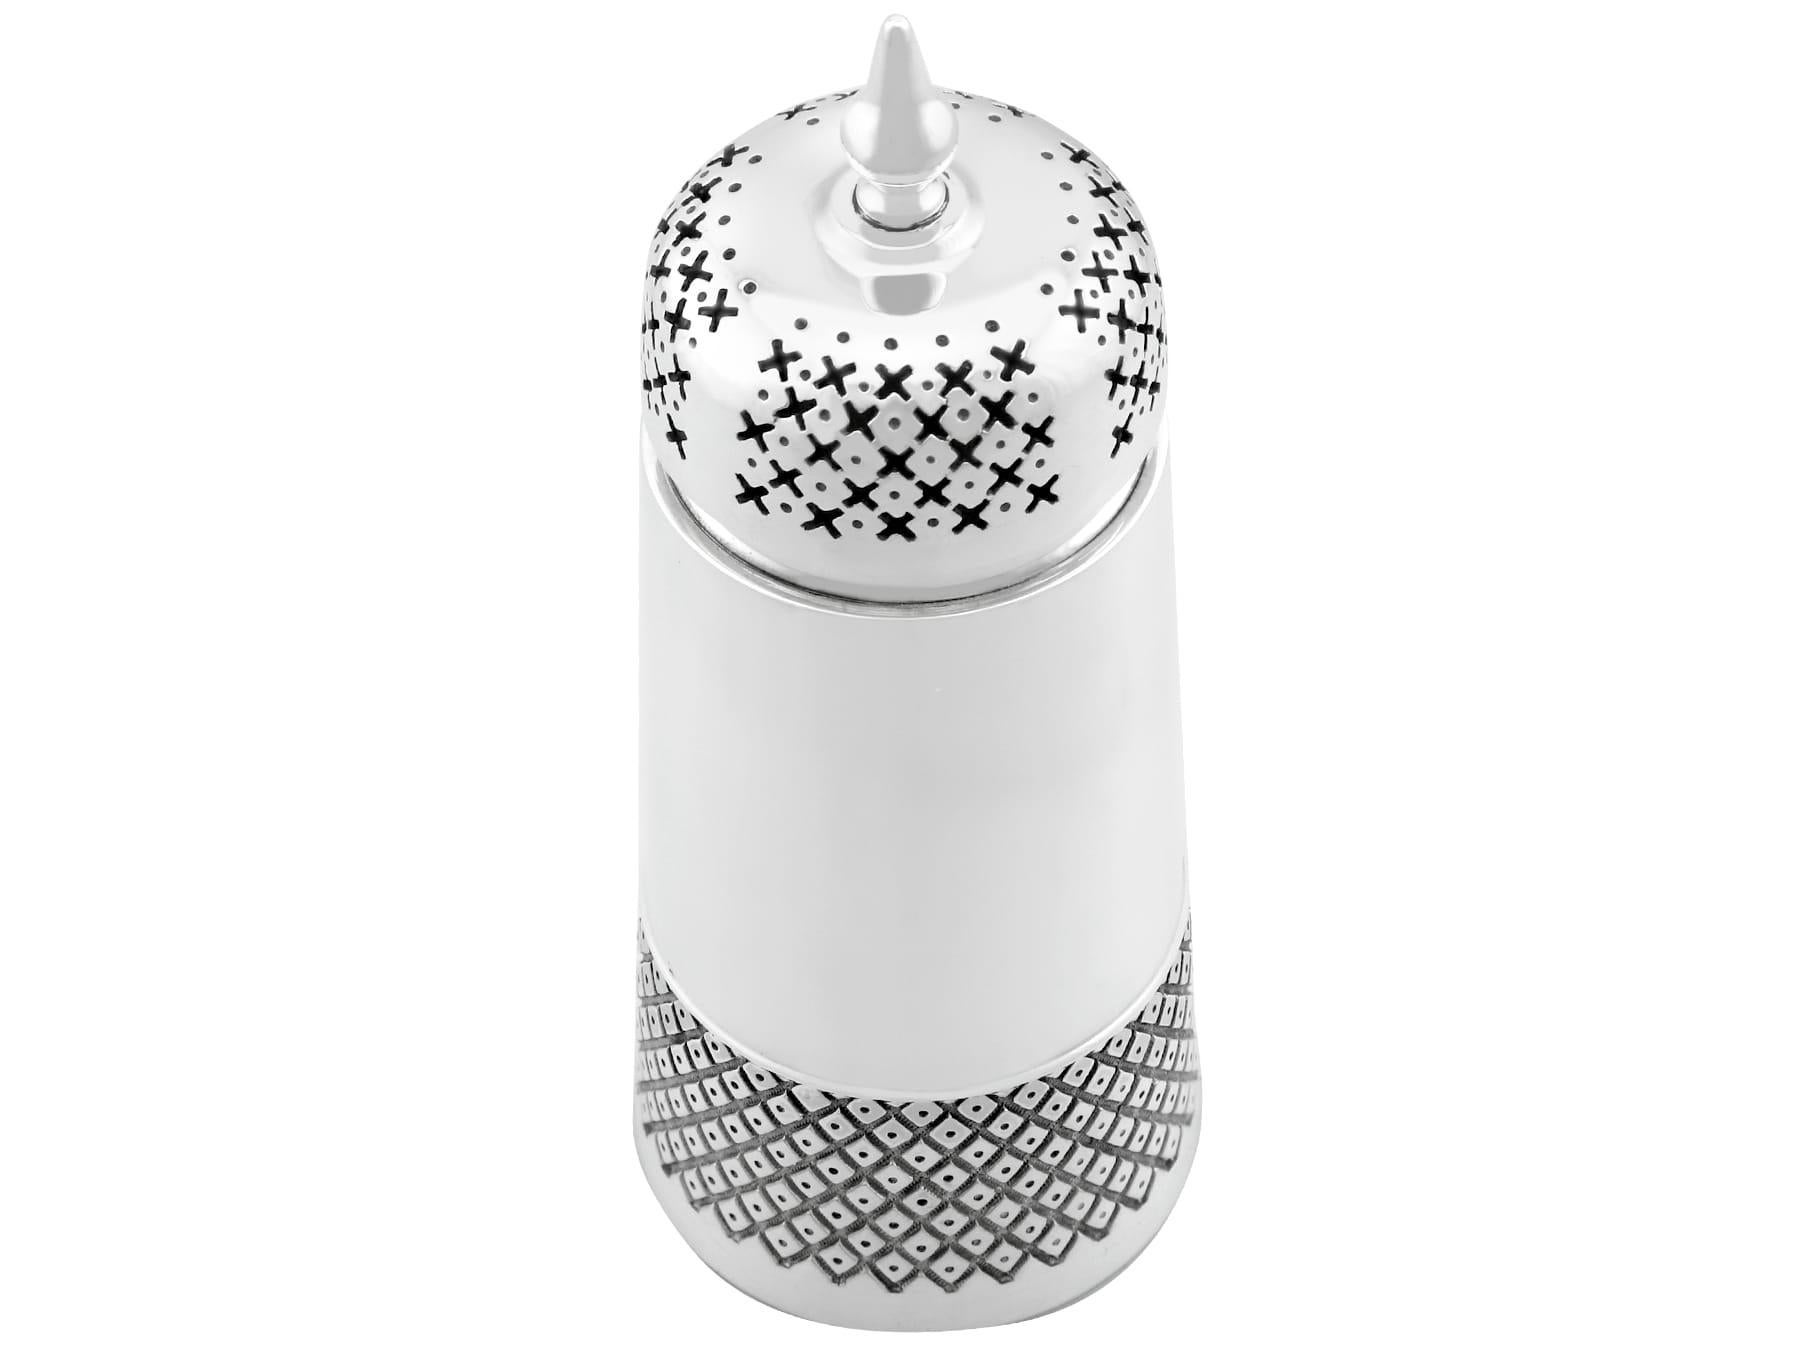 An exceptional, fine and impressive vintage Elizabeth II English sterling silver sugar caster in the Design style; an addition to our silver teaware collection

This exceptional vintage English sterling silver caster has a tapering cylindrical